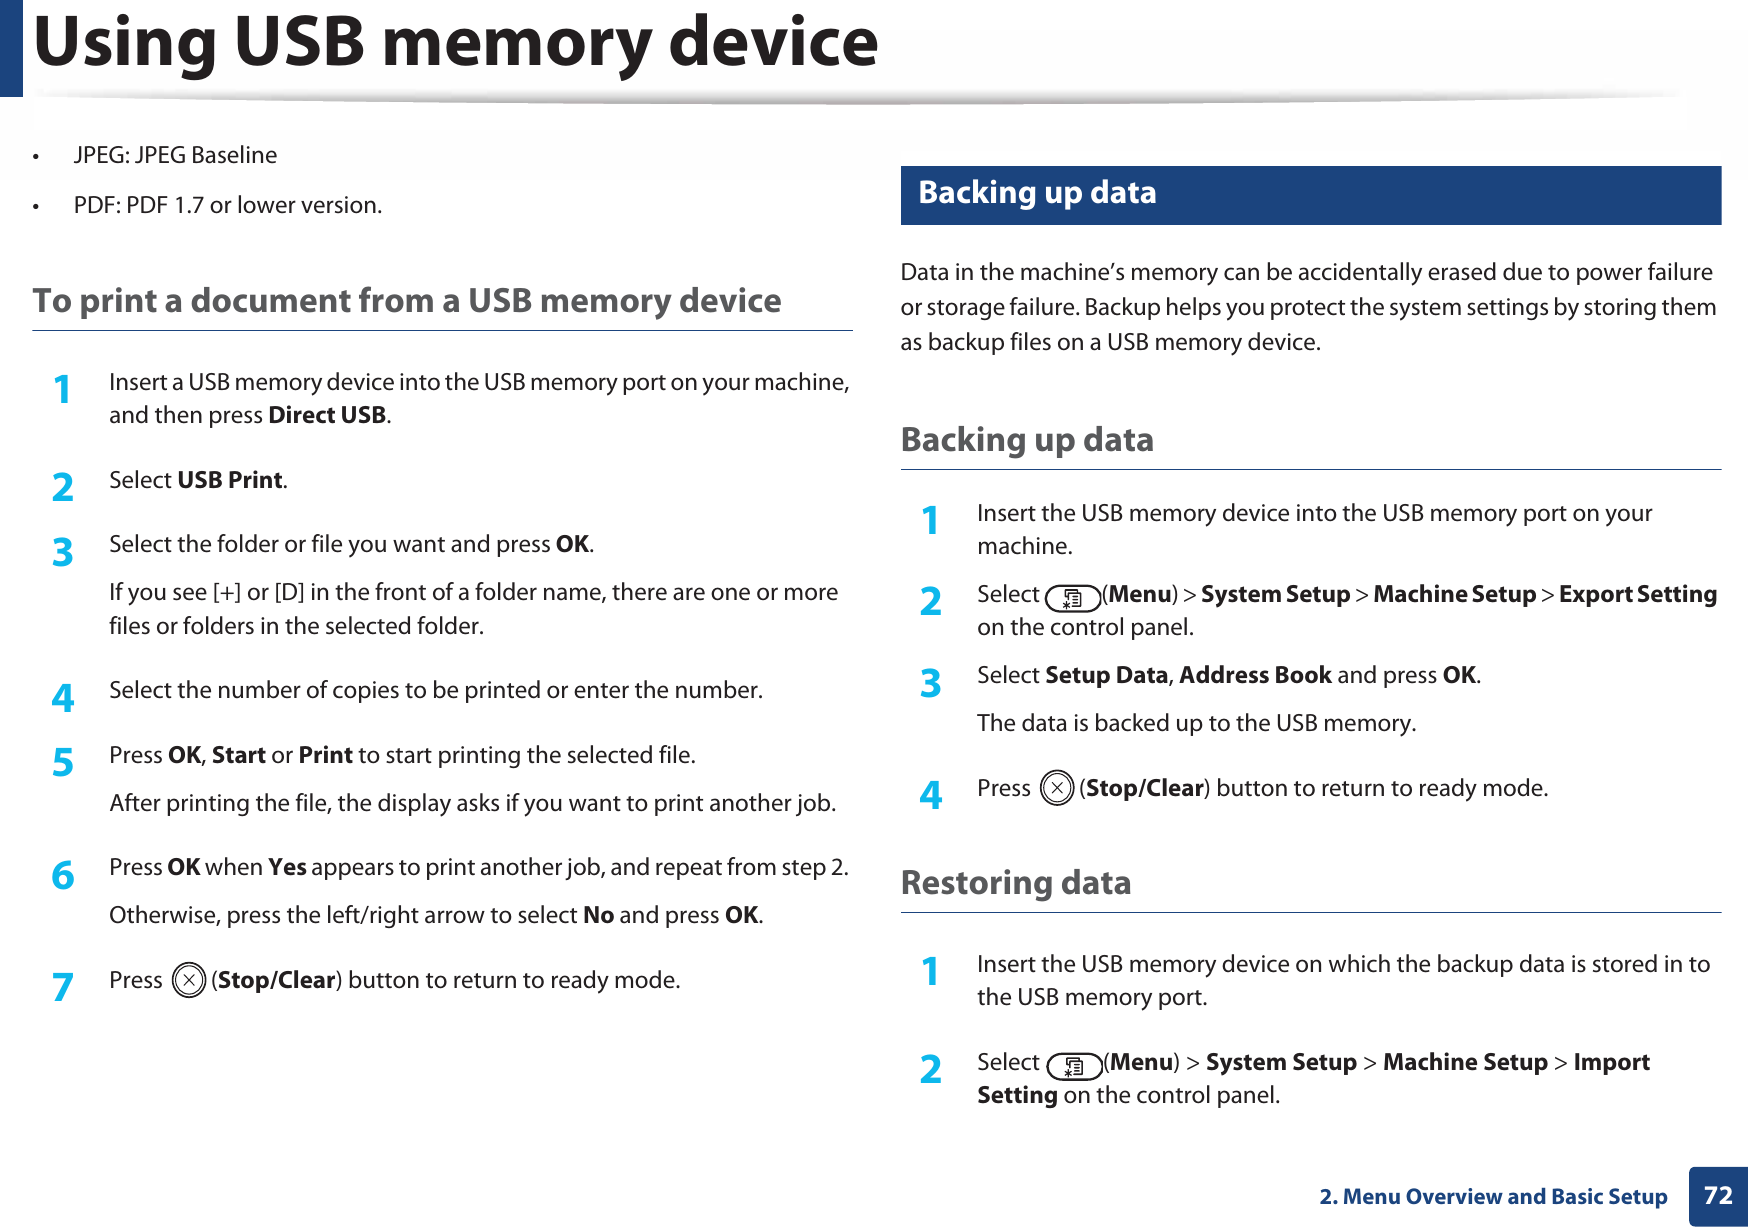 Using USB memory device722. Menu Overview and Basic Setup• JPEG: JPEG Baseline• PDF: PDF 1.7 or lower version.To print a document from a USB memory device1Insert a USB memory device into the USB memory port on your machine, and then press Direct USB.2  Select USB Print.3  Select the folder or file you want and press OK.If you see [+] or [D] in the front of a folder name, there are one or more files or folders in the selected folder.4  Select the number of copies to be printed or enter the number.5  Press OK, Start or Print to start printing the selected file. After printing the file, the display asks if you want to print another job.6  Press OK when Yes appears to print another job, and repeat from step 2. Otherwise, press the left/right arrow to select No and press OK.7  Press (Stop/Clear) button to return to ready mode.27 Backing up data Data in the machine’s memory can be accidentally erased due to power failure or storage failure. Backup helps you protect the system settings by storing them as backup files on a USB memory device.Backing up data1Insert the USB memory device into the USB memory port on your machine.2  Select (Menu) &gt; System Setup &gt; Machine Setup &gt; Export Setting on the control panel.3  Select Setup Data, Address Book and press OK. The data is backed up to the USB memory.4  Press (Stop/Clear) button to return to ready mode.Restoring data1Insert the USB memory device on which the backup data is stored in to the USB memory port.2  Select (Menu) &gt; System Setup &gt; Machine Setup &gt; Import Setting on the control panel.